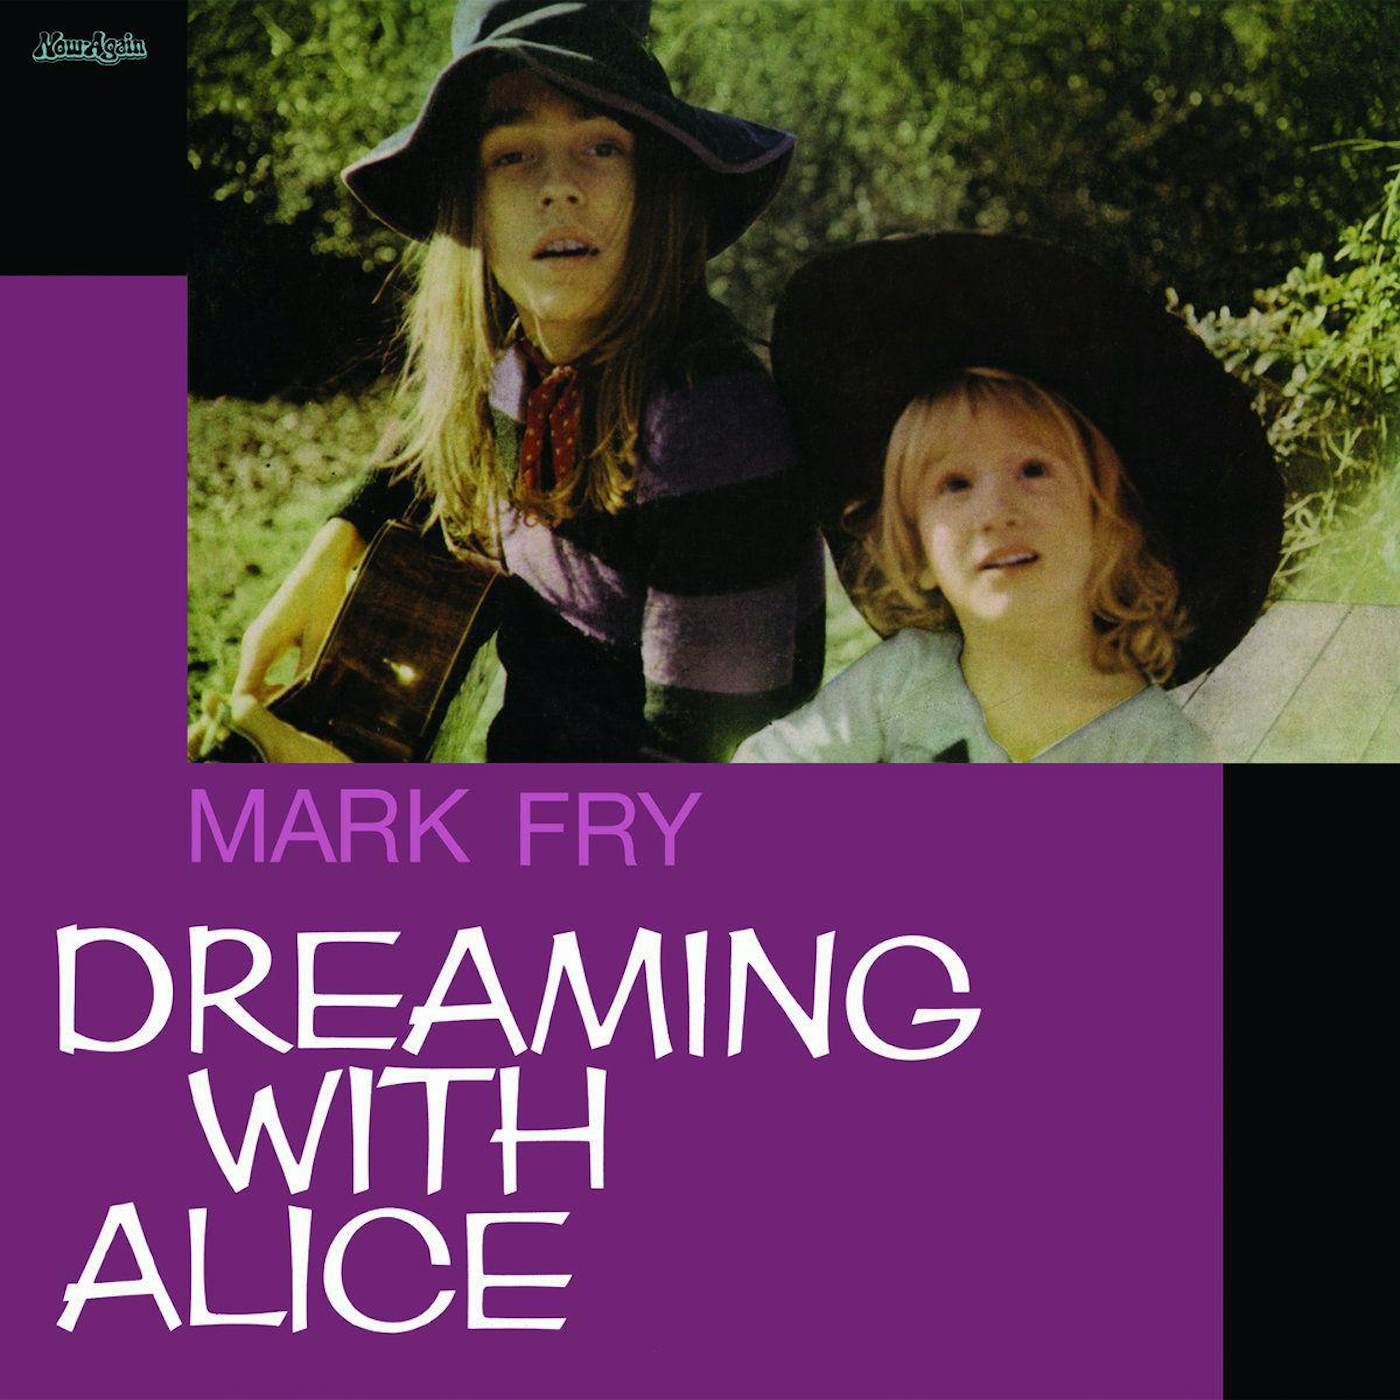 Mark Fry Dreaming With Alice Vinyl Record